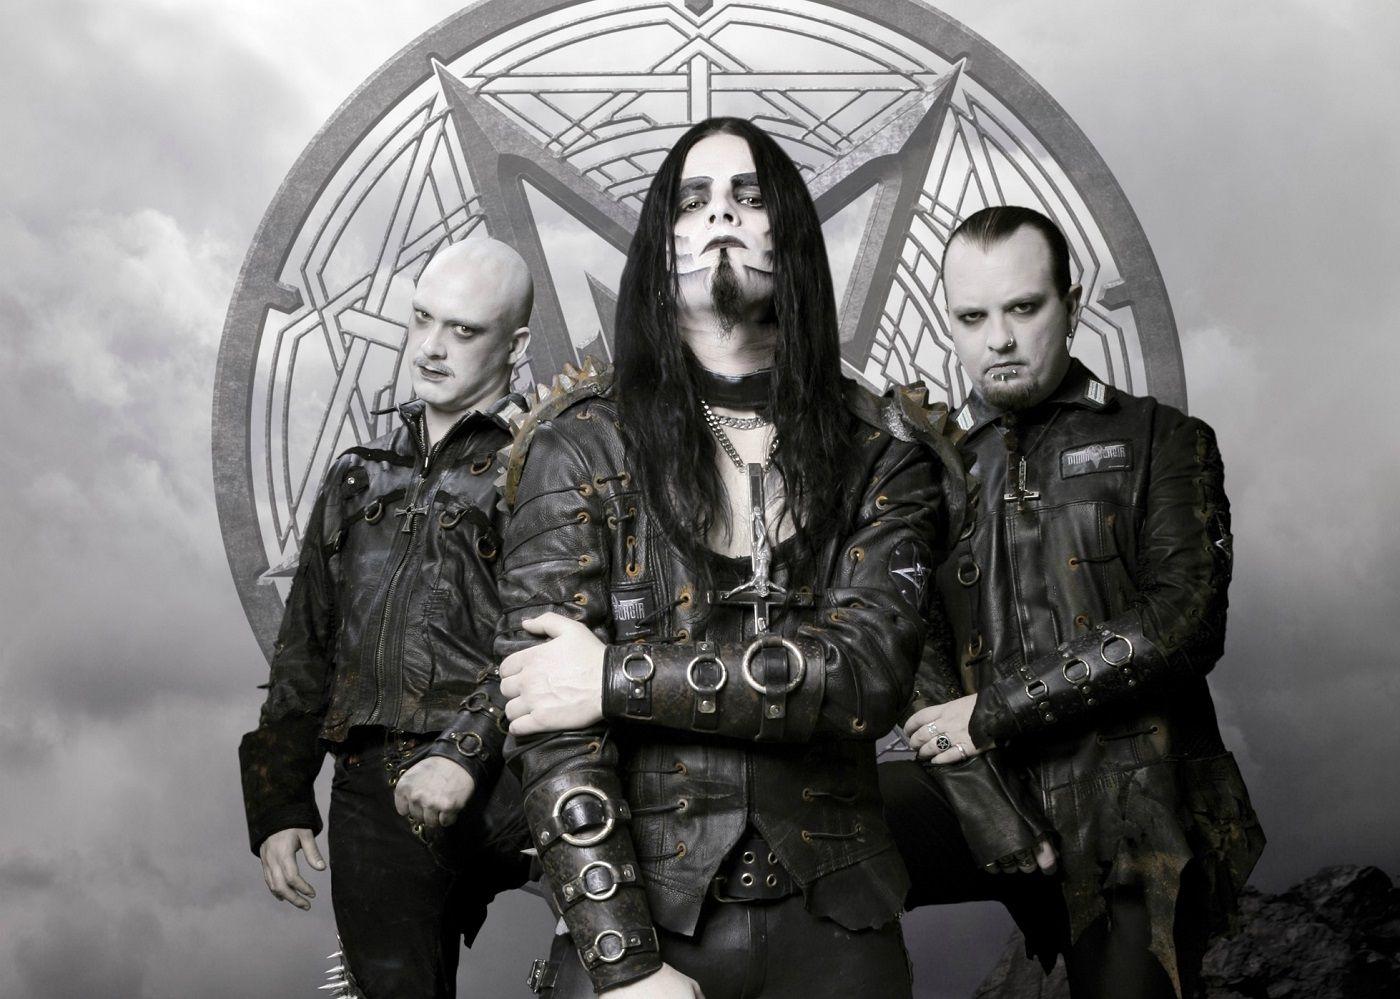 Found this picture of Shagrath and had to share. Dimmu Borgir :  r/AltLadyboners